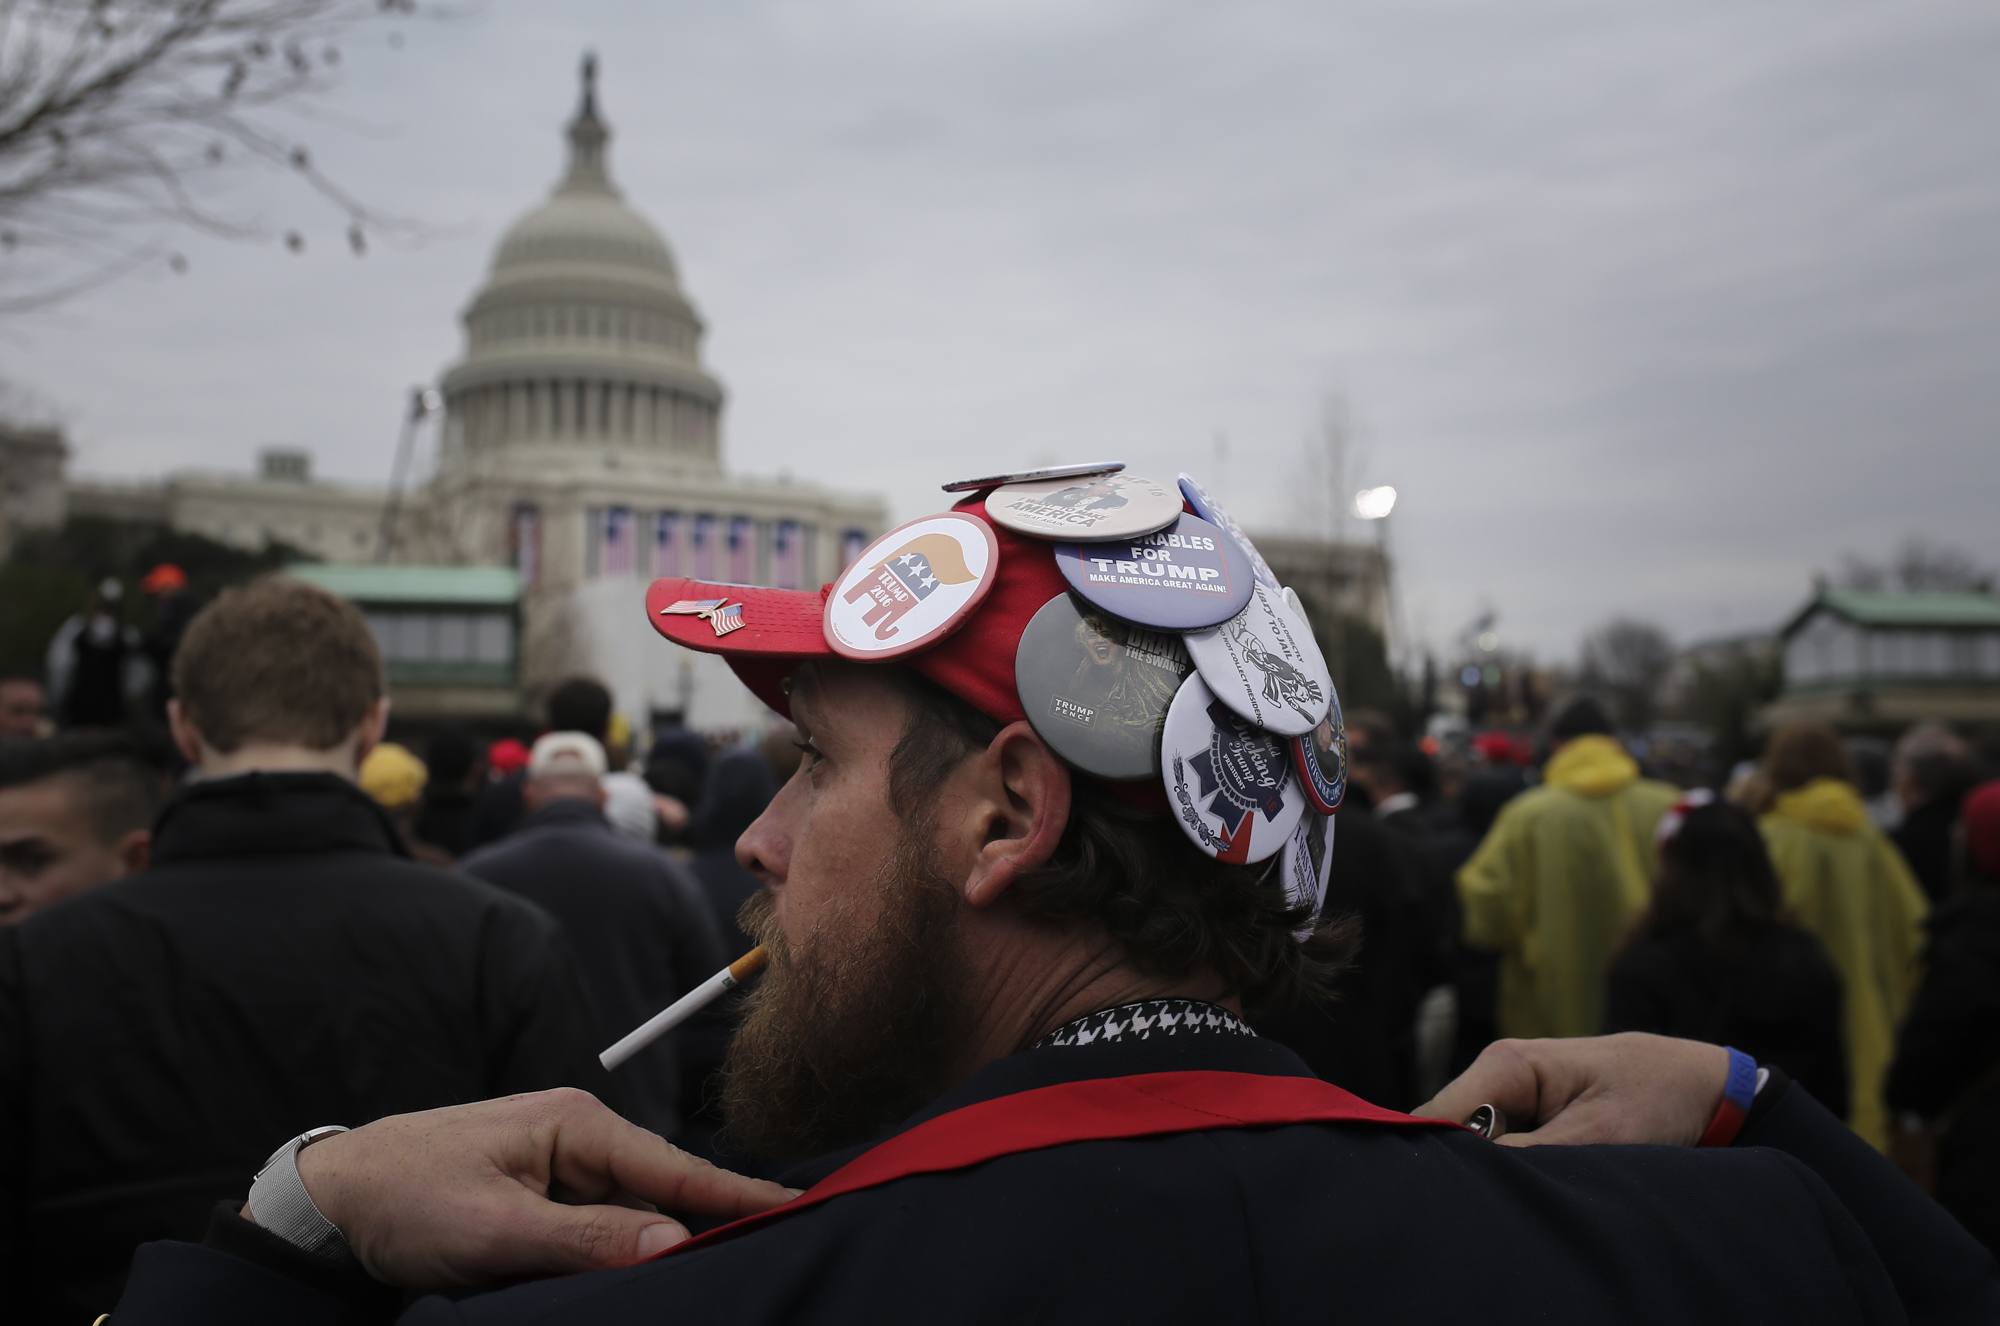  Matthew Cooper of Toledo, OH. watches the 58th Presidential Inauguration for President Elect Donald Trump at the U.S. Capitol in Washington D.C., Friday, January 20, 2017. Cooper said "I'm ecstatic. I'm about to start crying here in a minute. I have